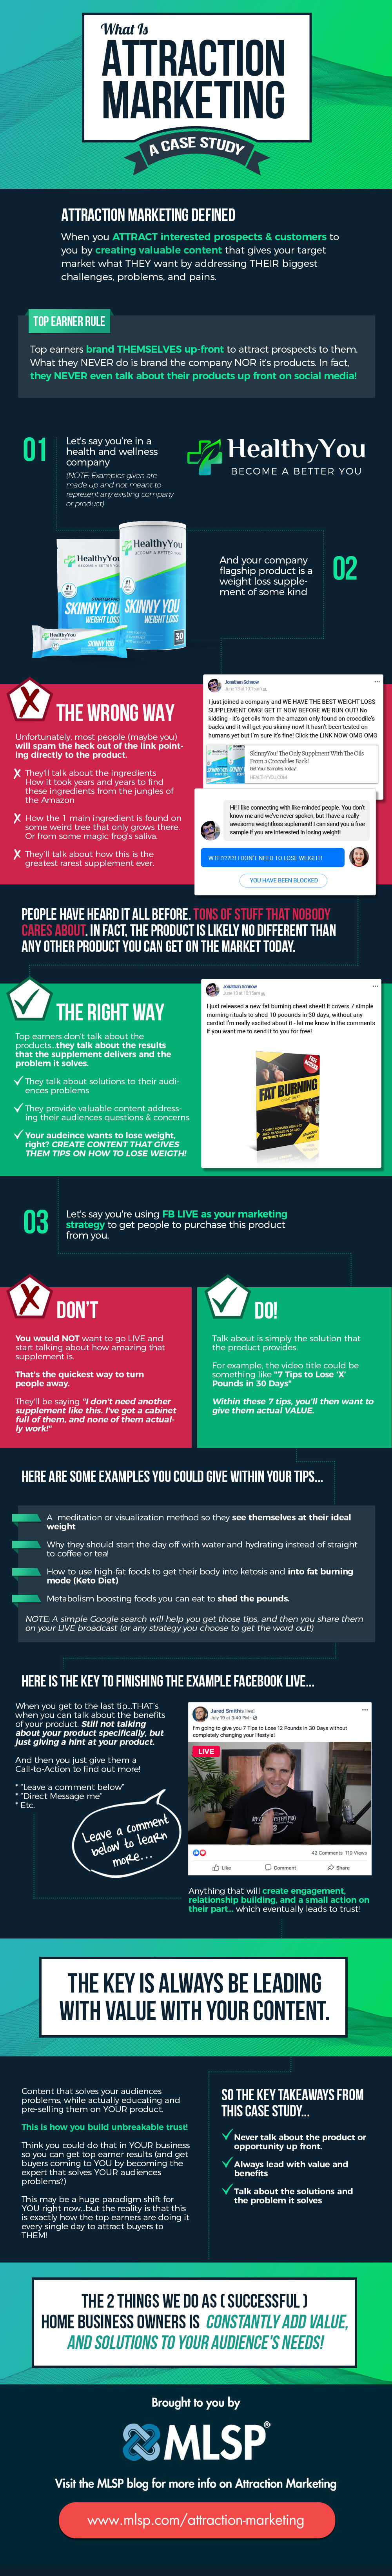 MLSP 7 Step Attraction Marketing Case Study Infographic